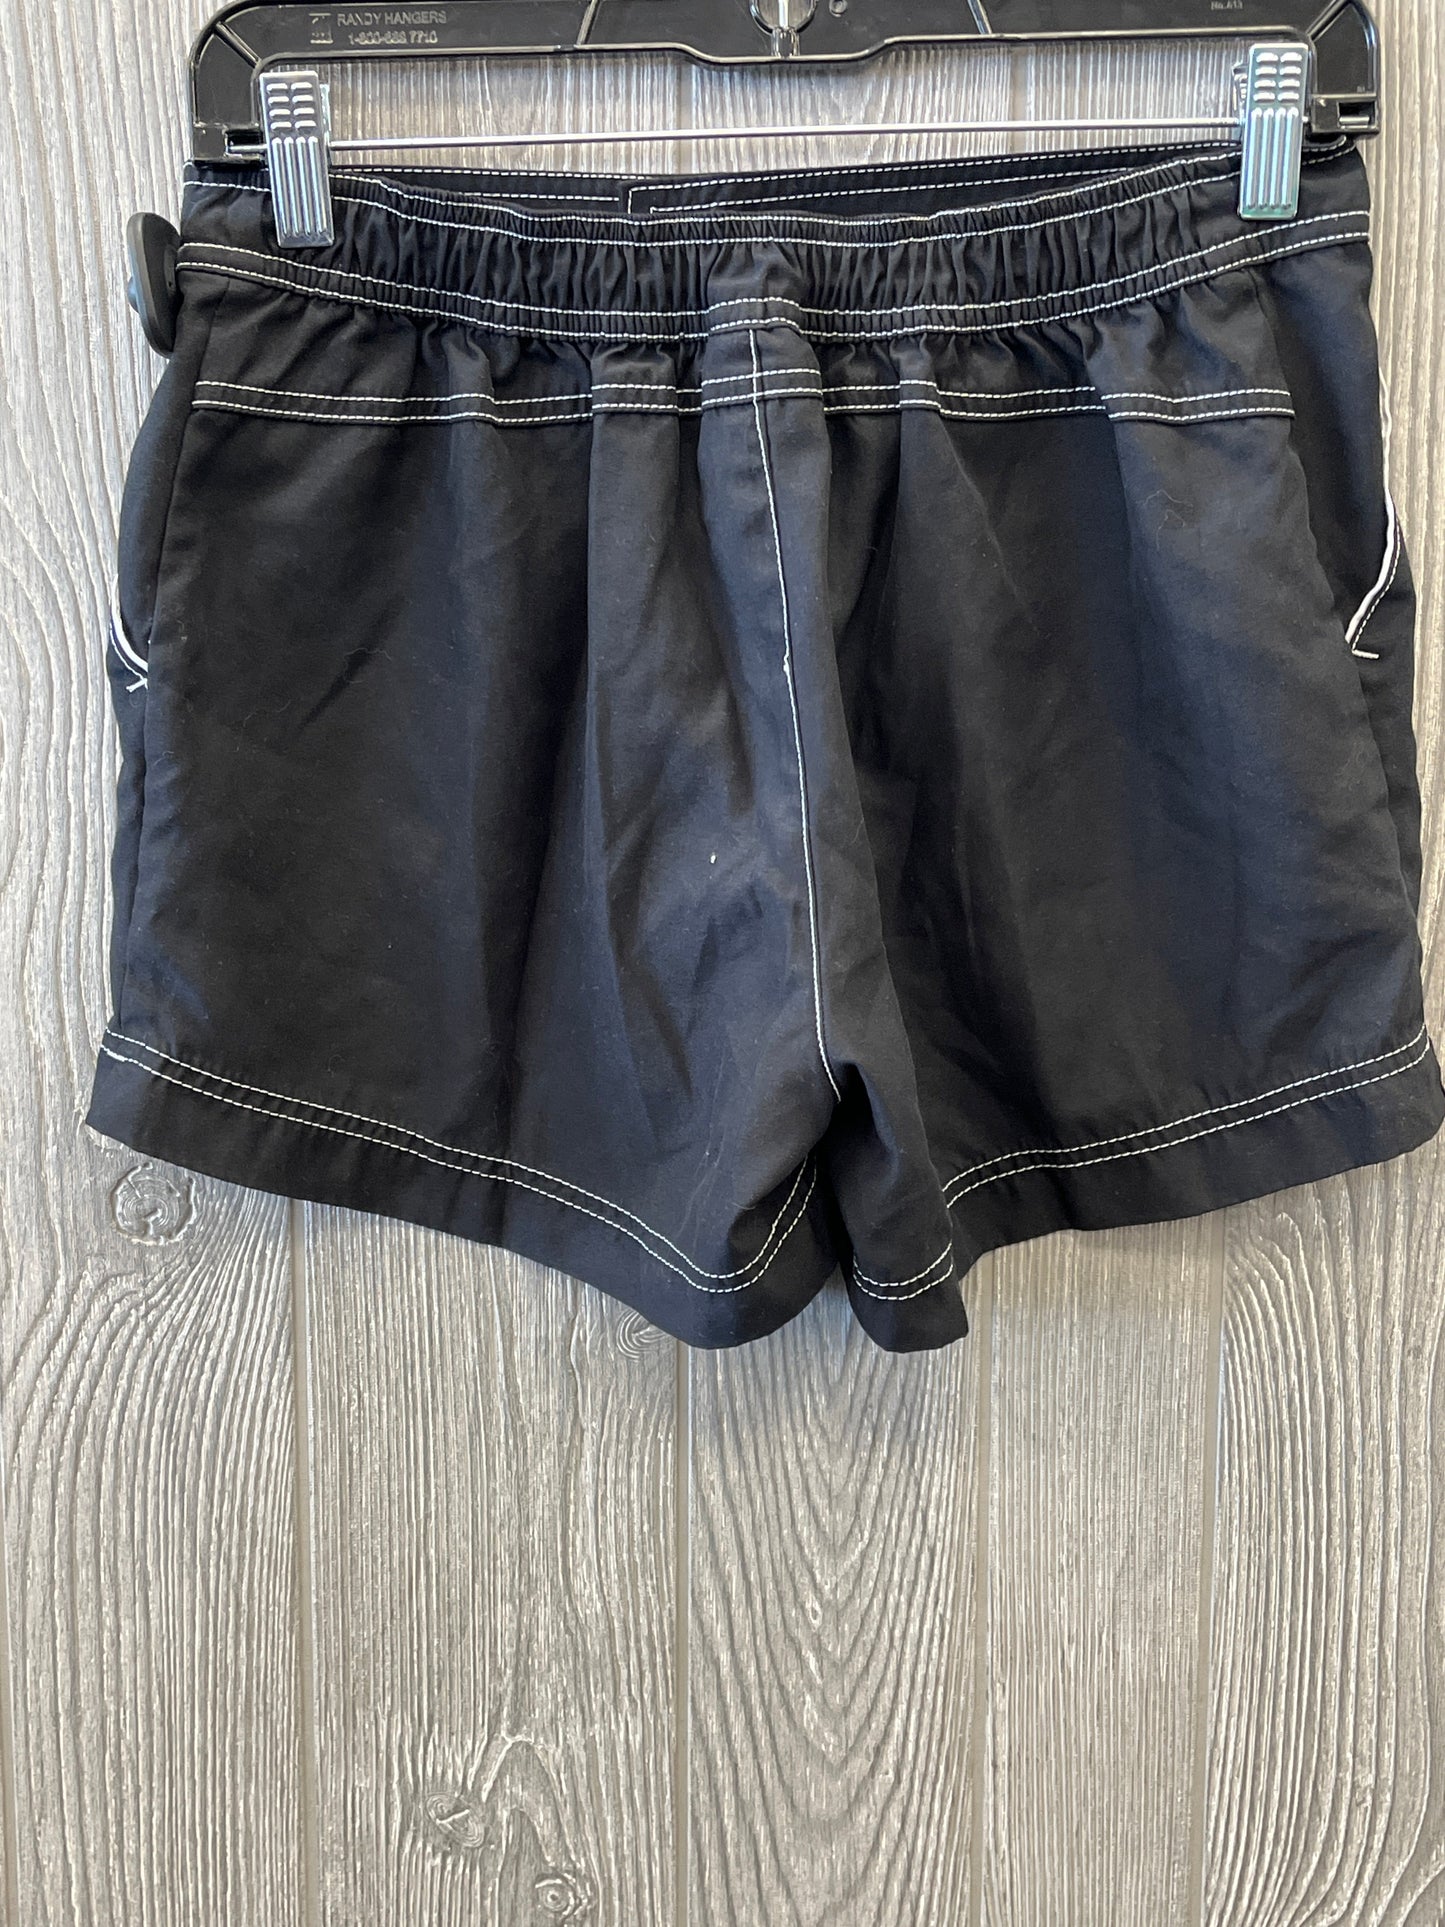 Shorts By Catalina  Size: 4